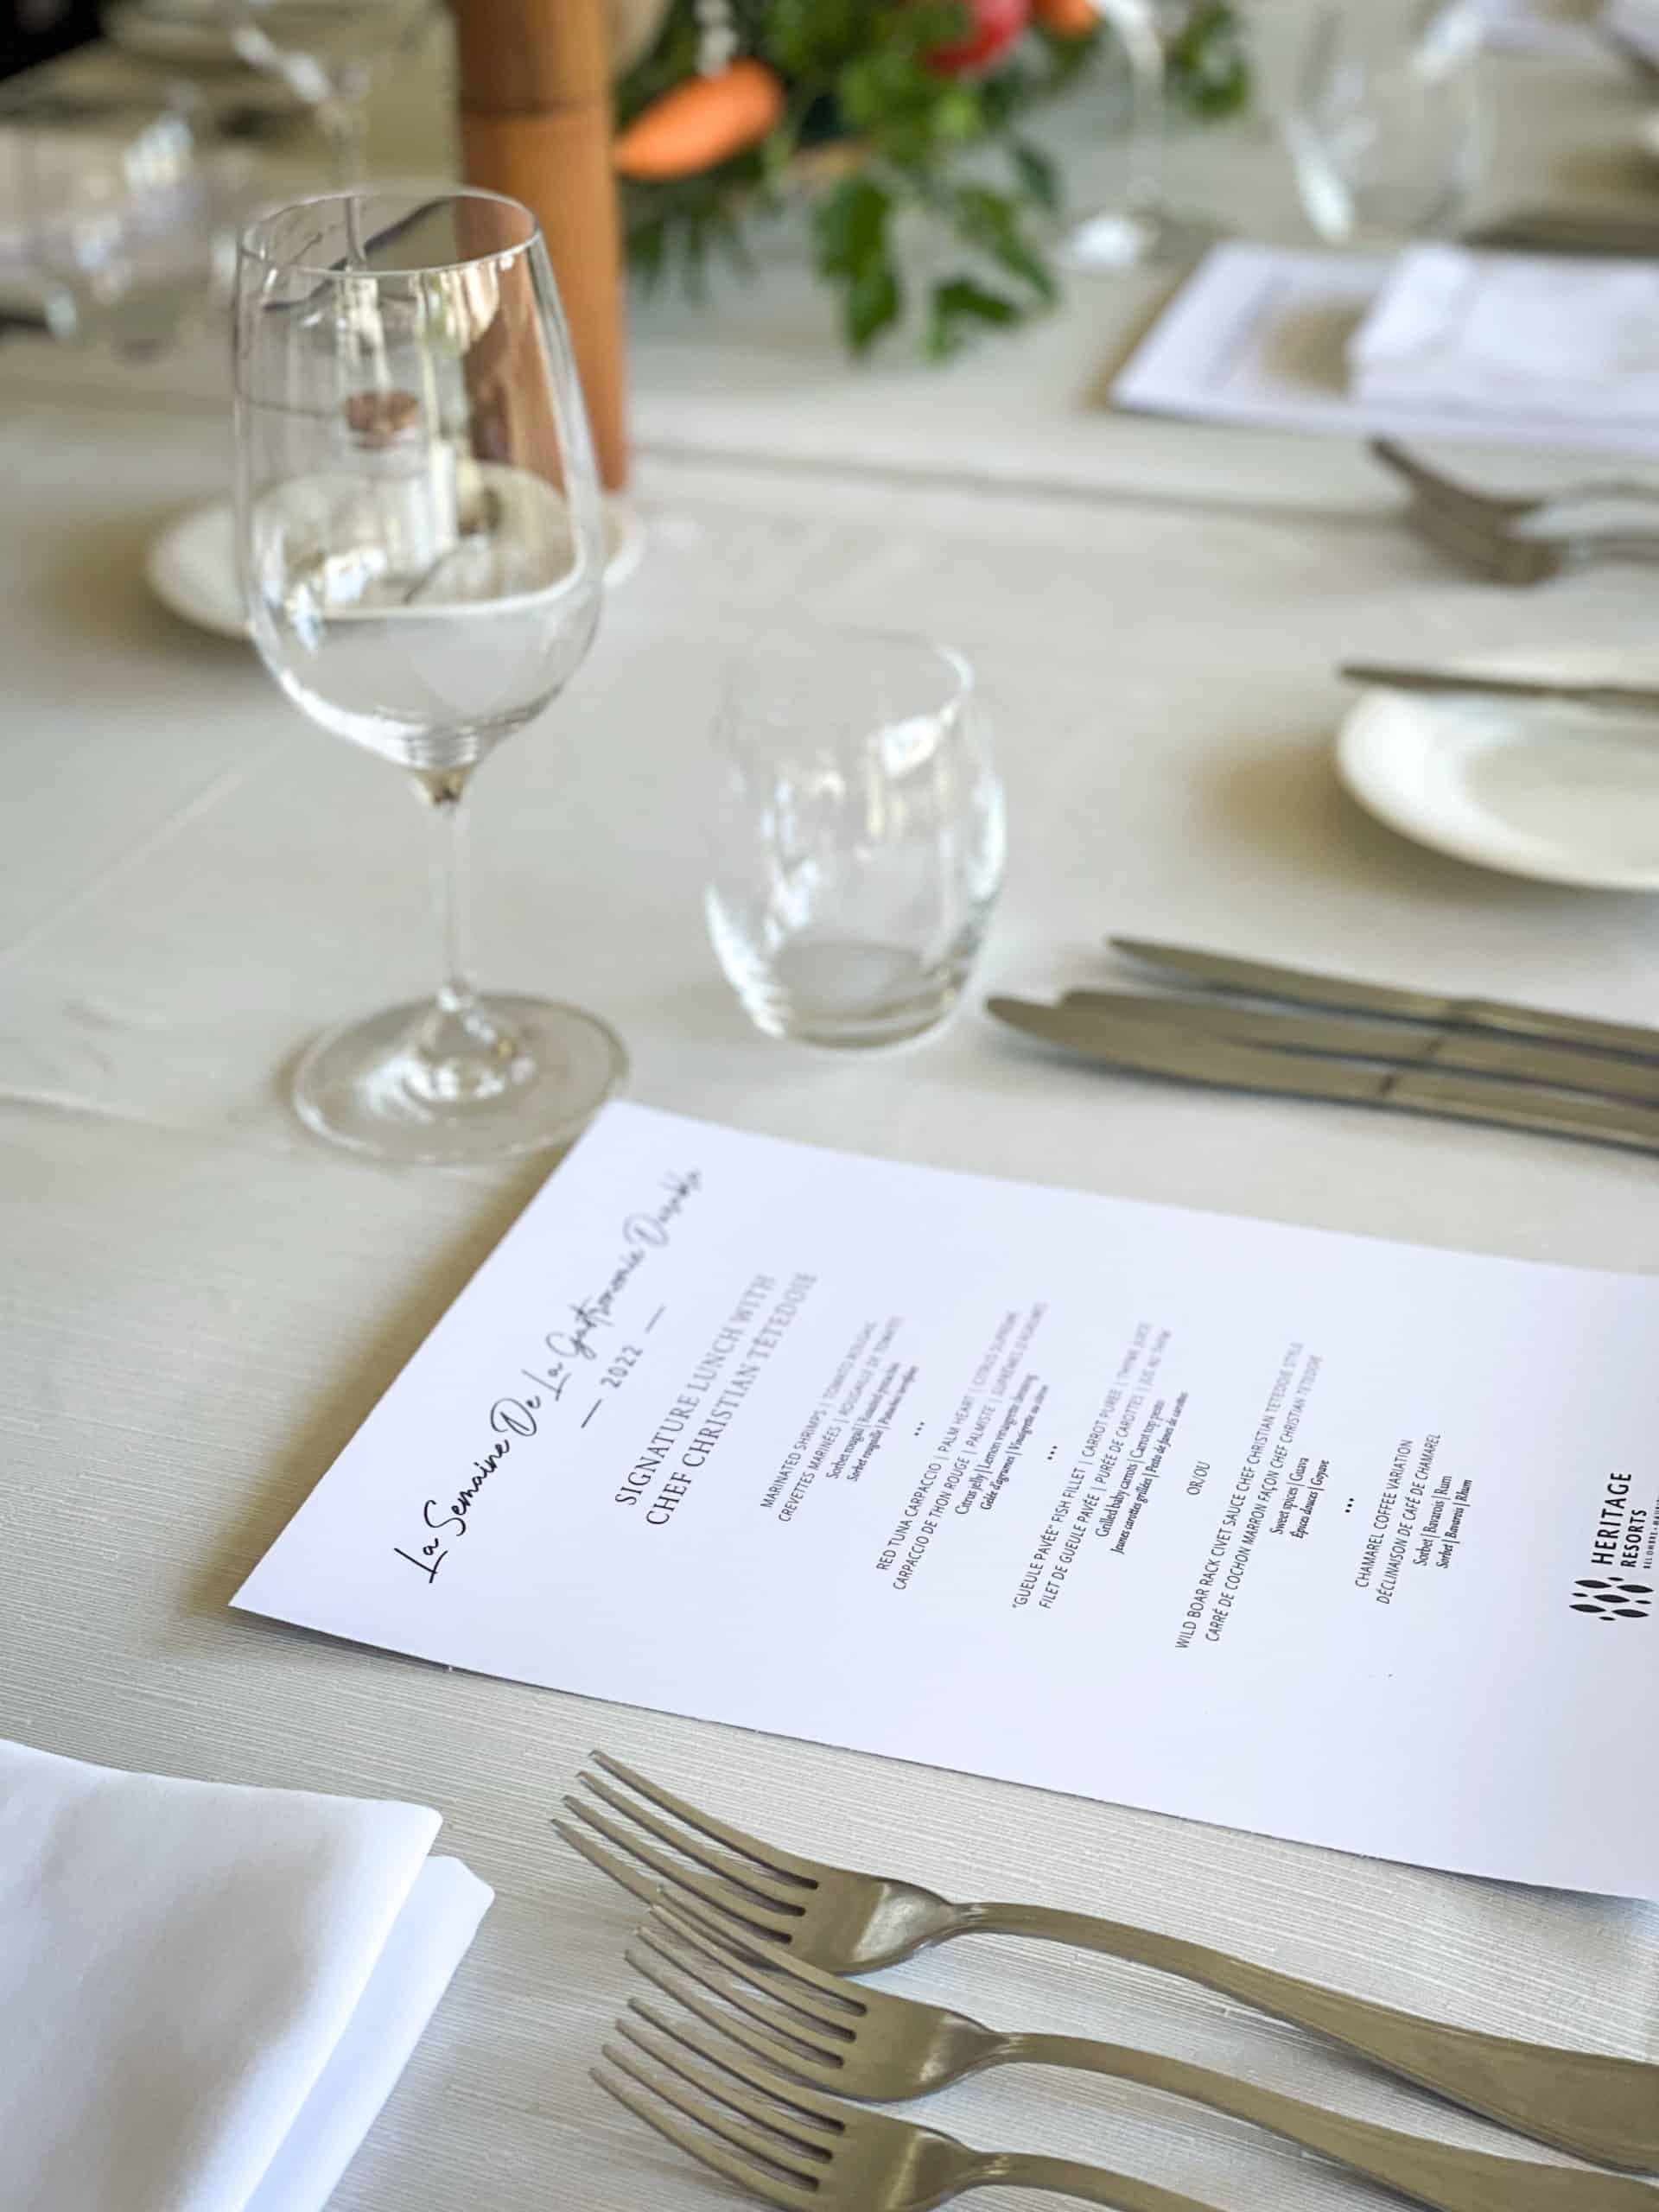 Mauritius - Telfair Heritage Resort - Signature Lunch with Chef Christian Tetedoie Menu and place settings